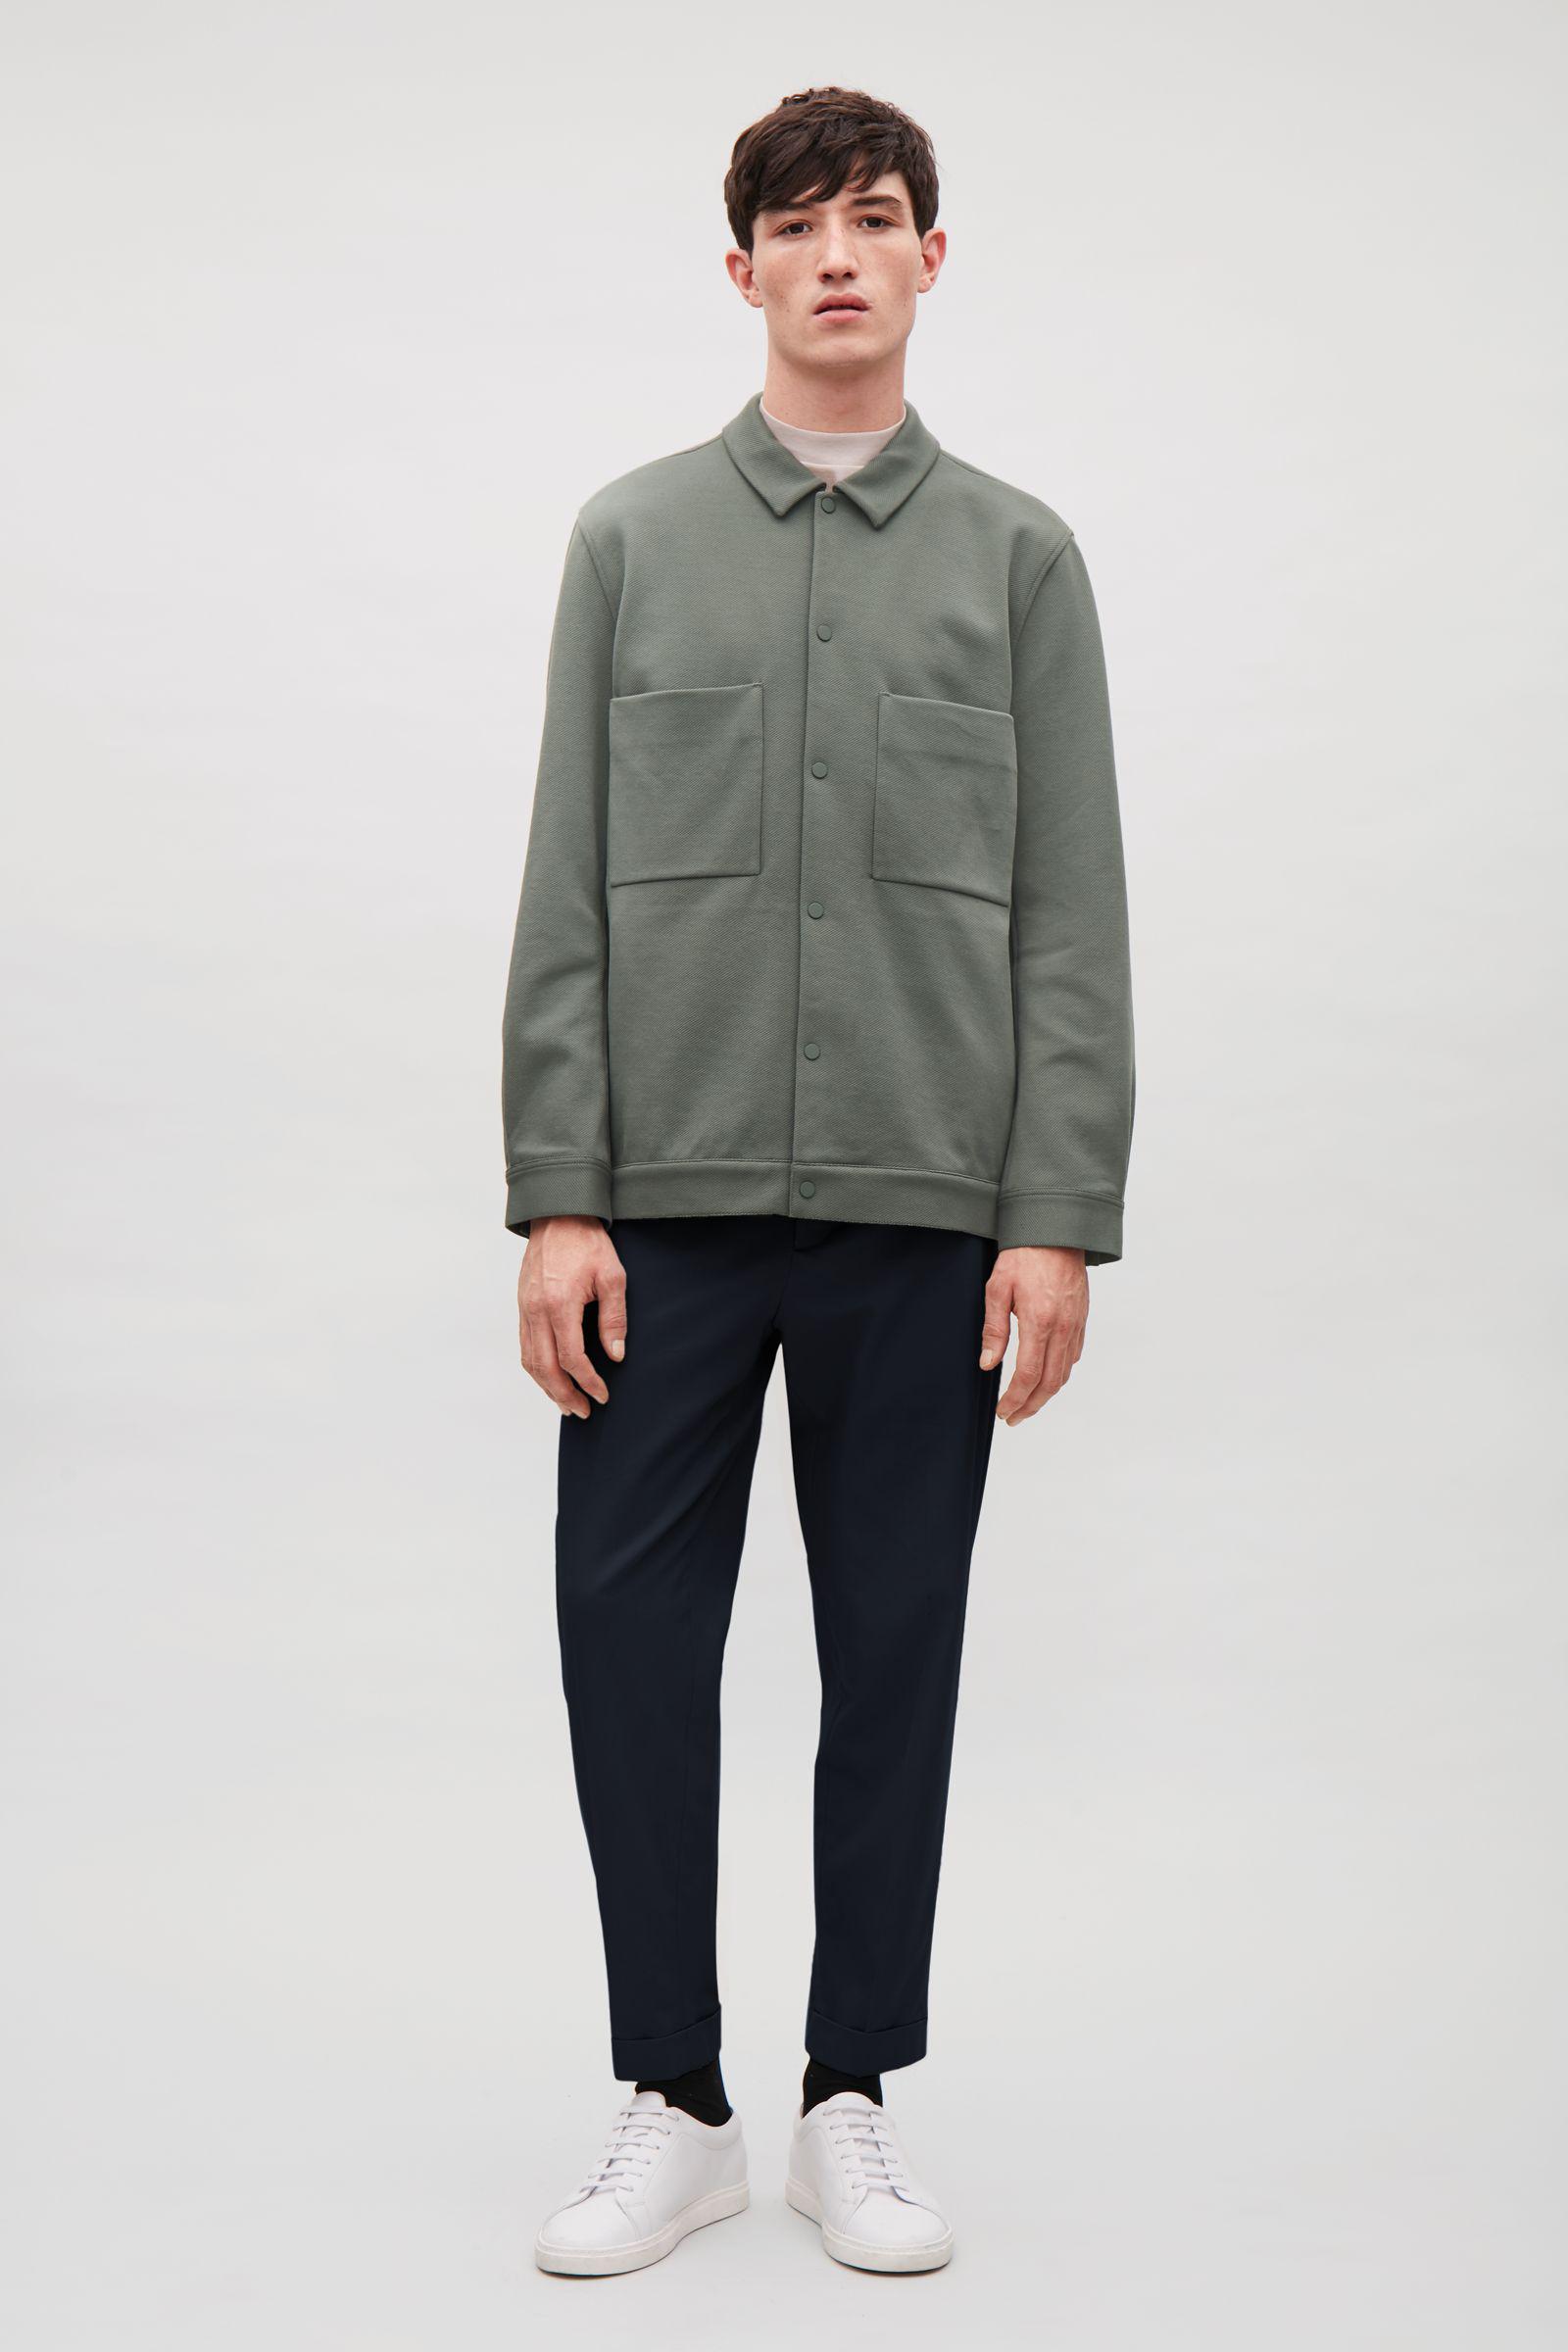 COS Twill Shirt Jacket in Green for Men | Lyst